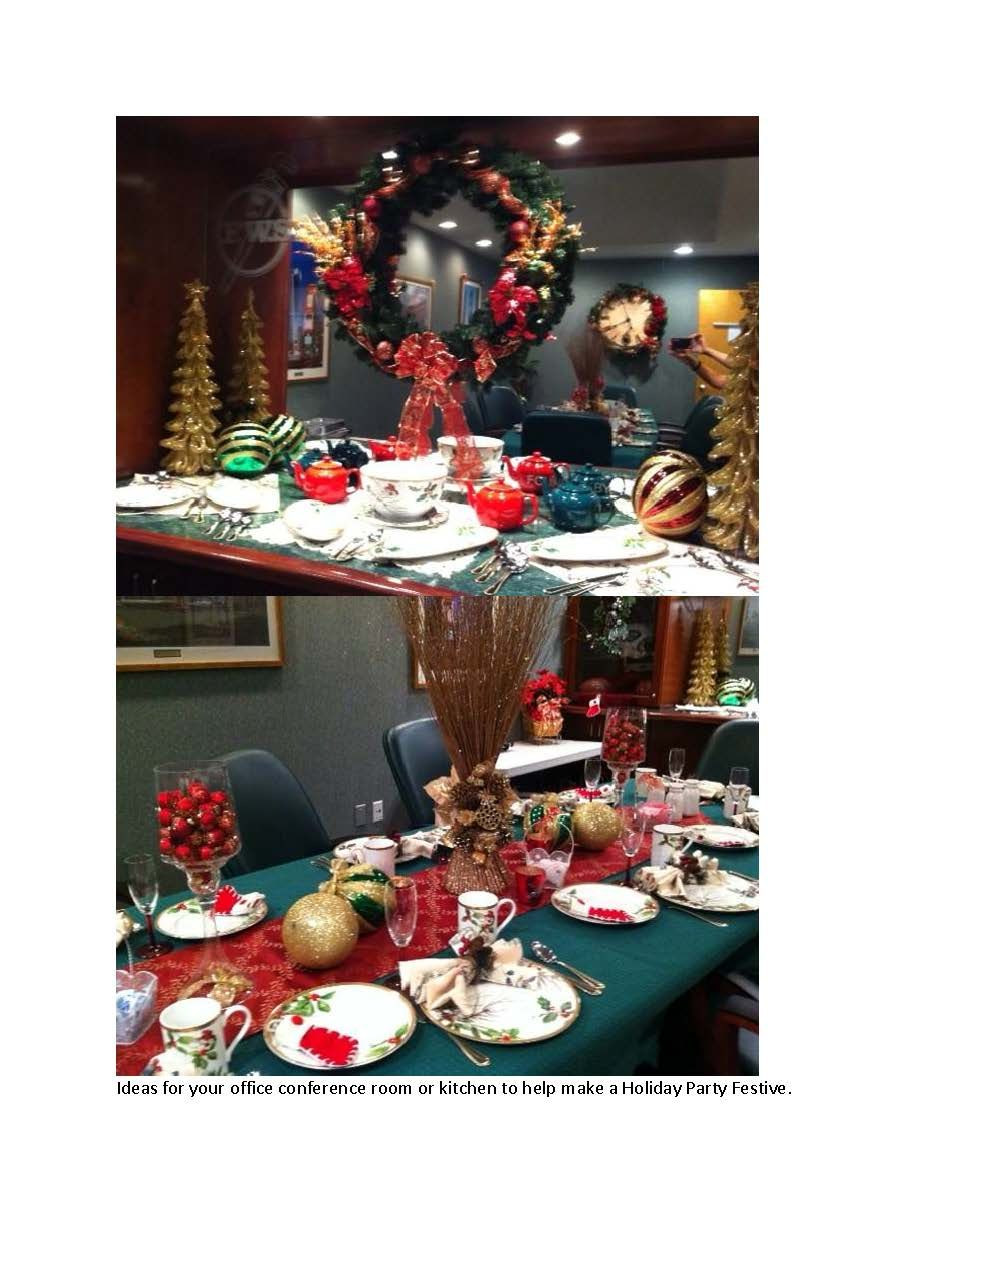 Ideas For Office Christmas Party
 Some ideas to turn your office conference room or kitchen